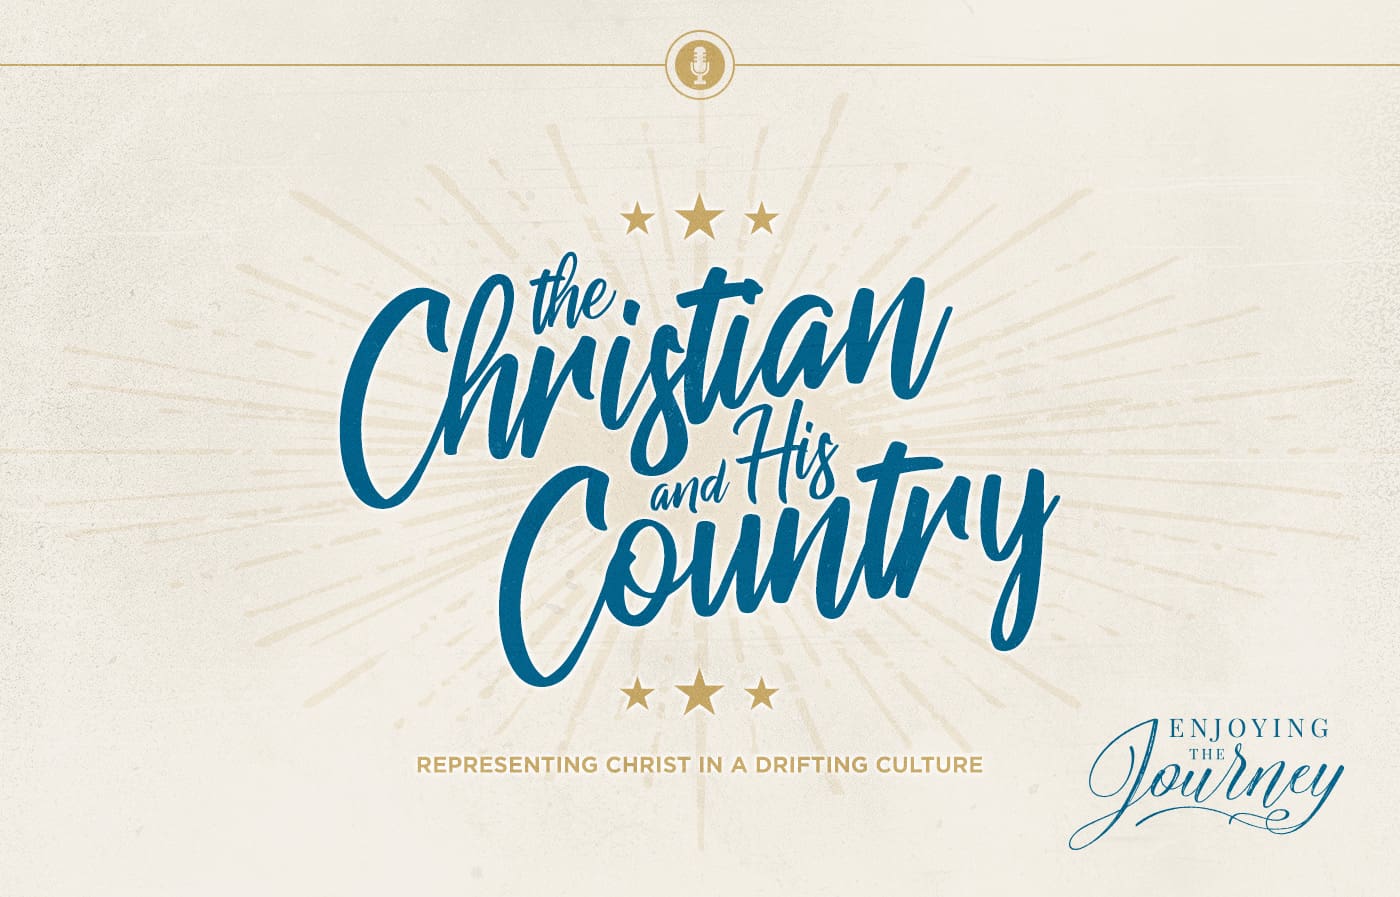 The Christian and His Country